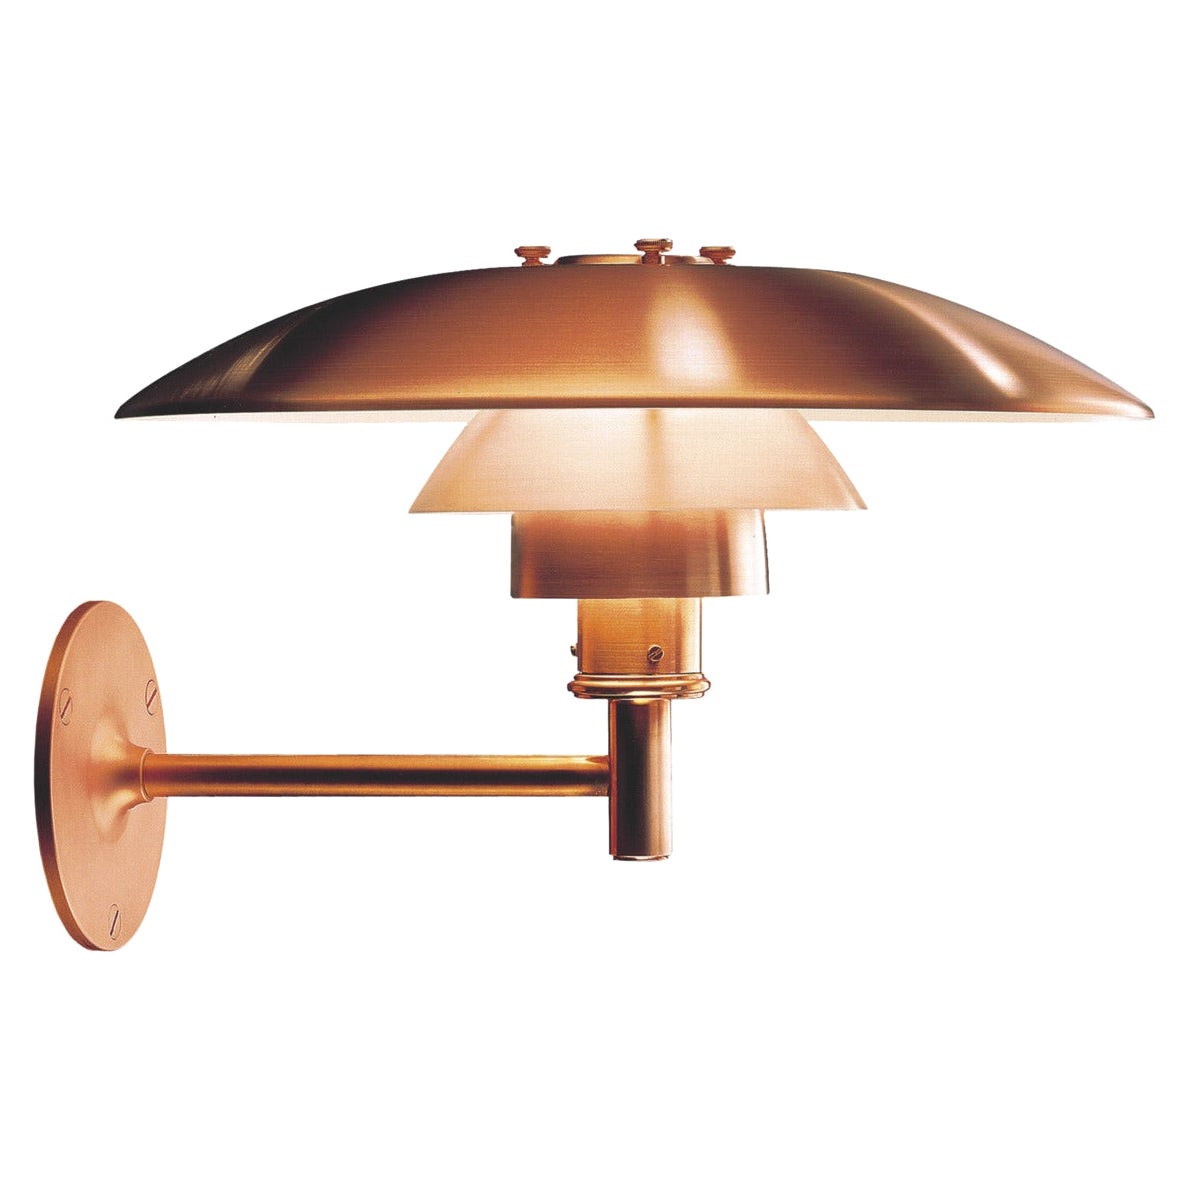 Pair of Poul Henningsen PH Wall Brown Patinated Outdoor Lamps for Louis Poulsen For Sale 6